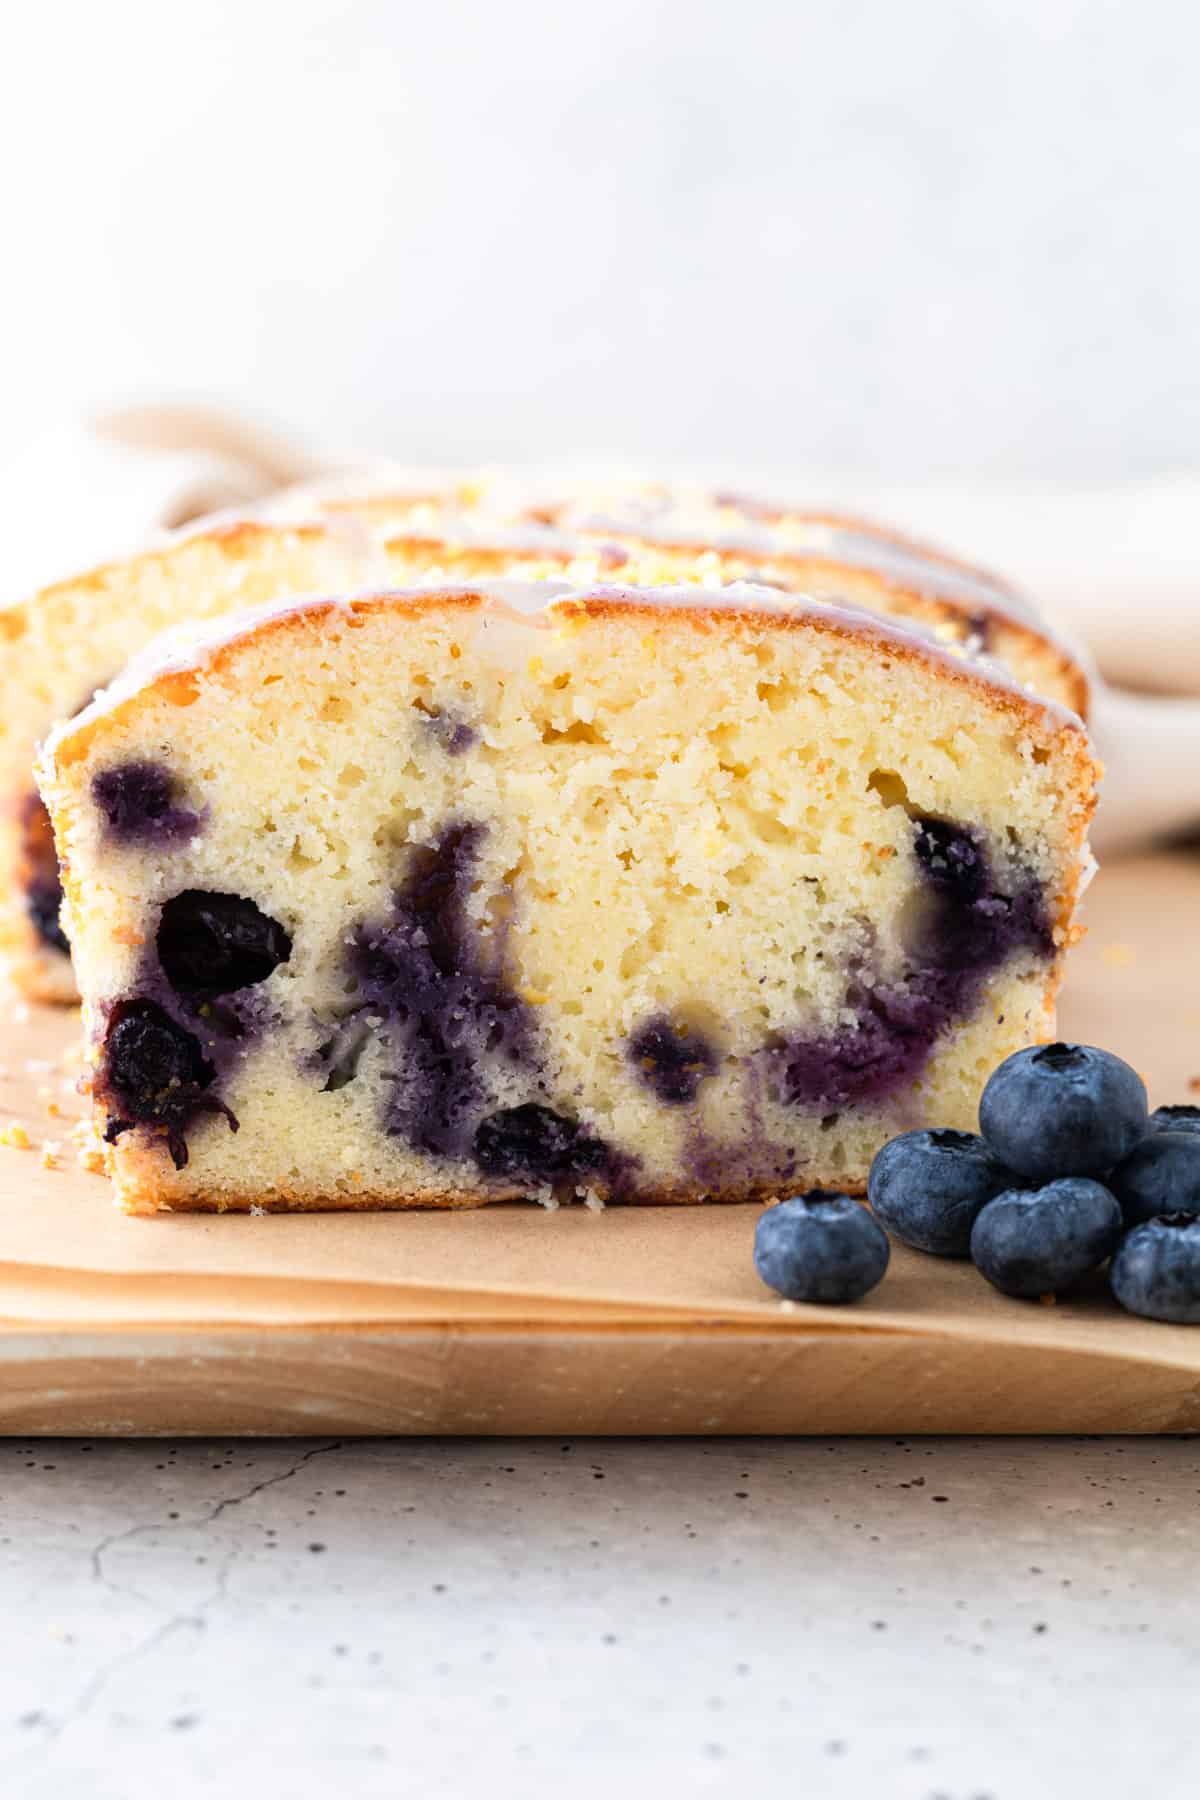 A slice of blueberry pound cake with fresh blueberries.